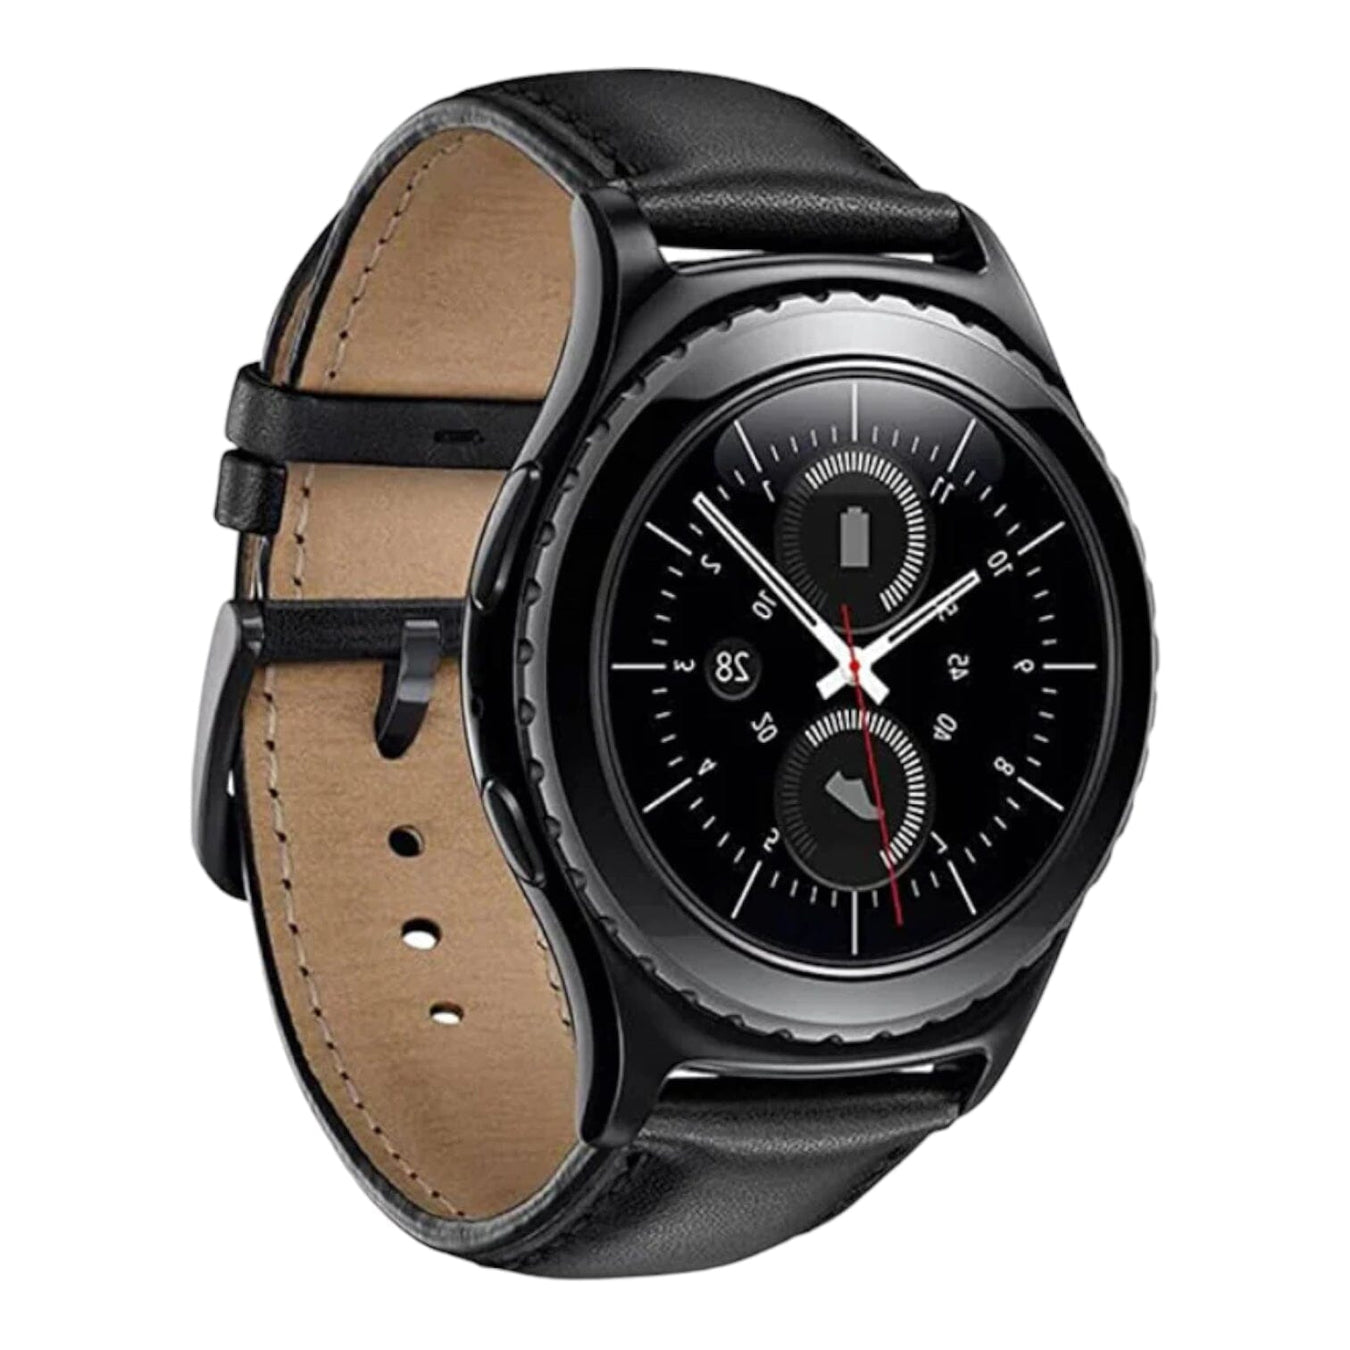 What model Samsung Gear Watch do I have?